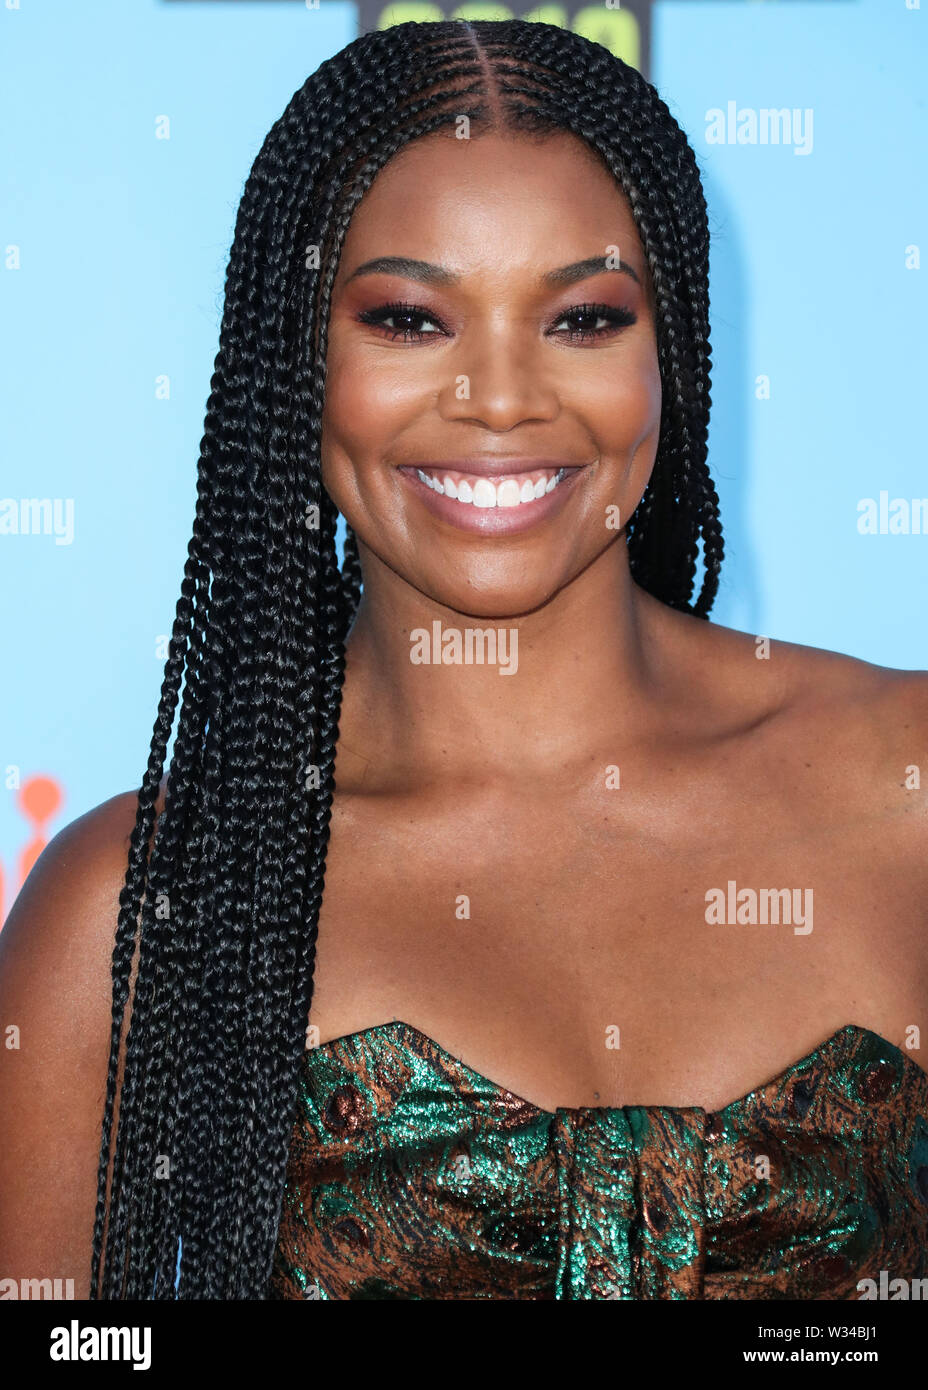 Santa Monica, United States. 11th July, 2019. SANTA MONICA, LOS ANGELES, CALIFORNIA, USA - JULY 11: Actress Gabrielle Union wearing Antonio Berardi arrives at the Nickelodeon Kids' Choice Sports 2019 held at Barker Hangar on July 11, 2019 in Santa Monica, Los Angeles, California, United States. (Photo by Xavier Collin/Image Press Agency) Credit: Image Press Agency/Alamy Live News Stock Photo